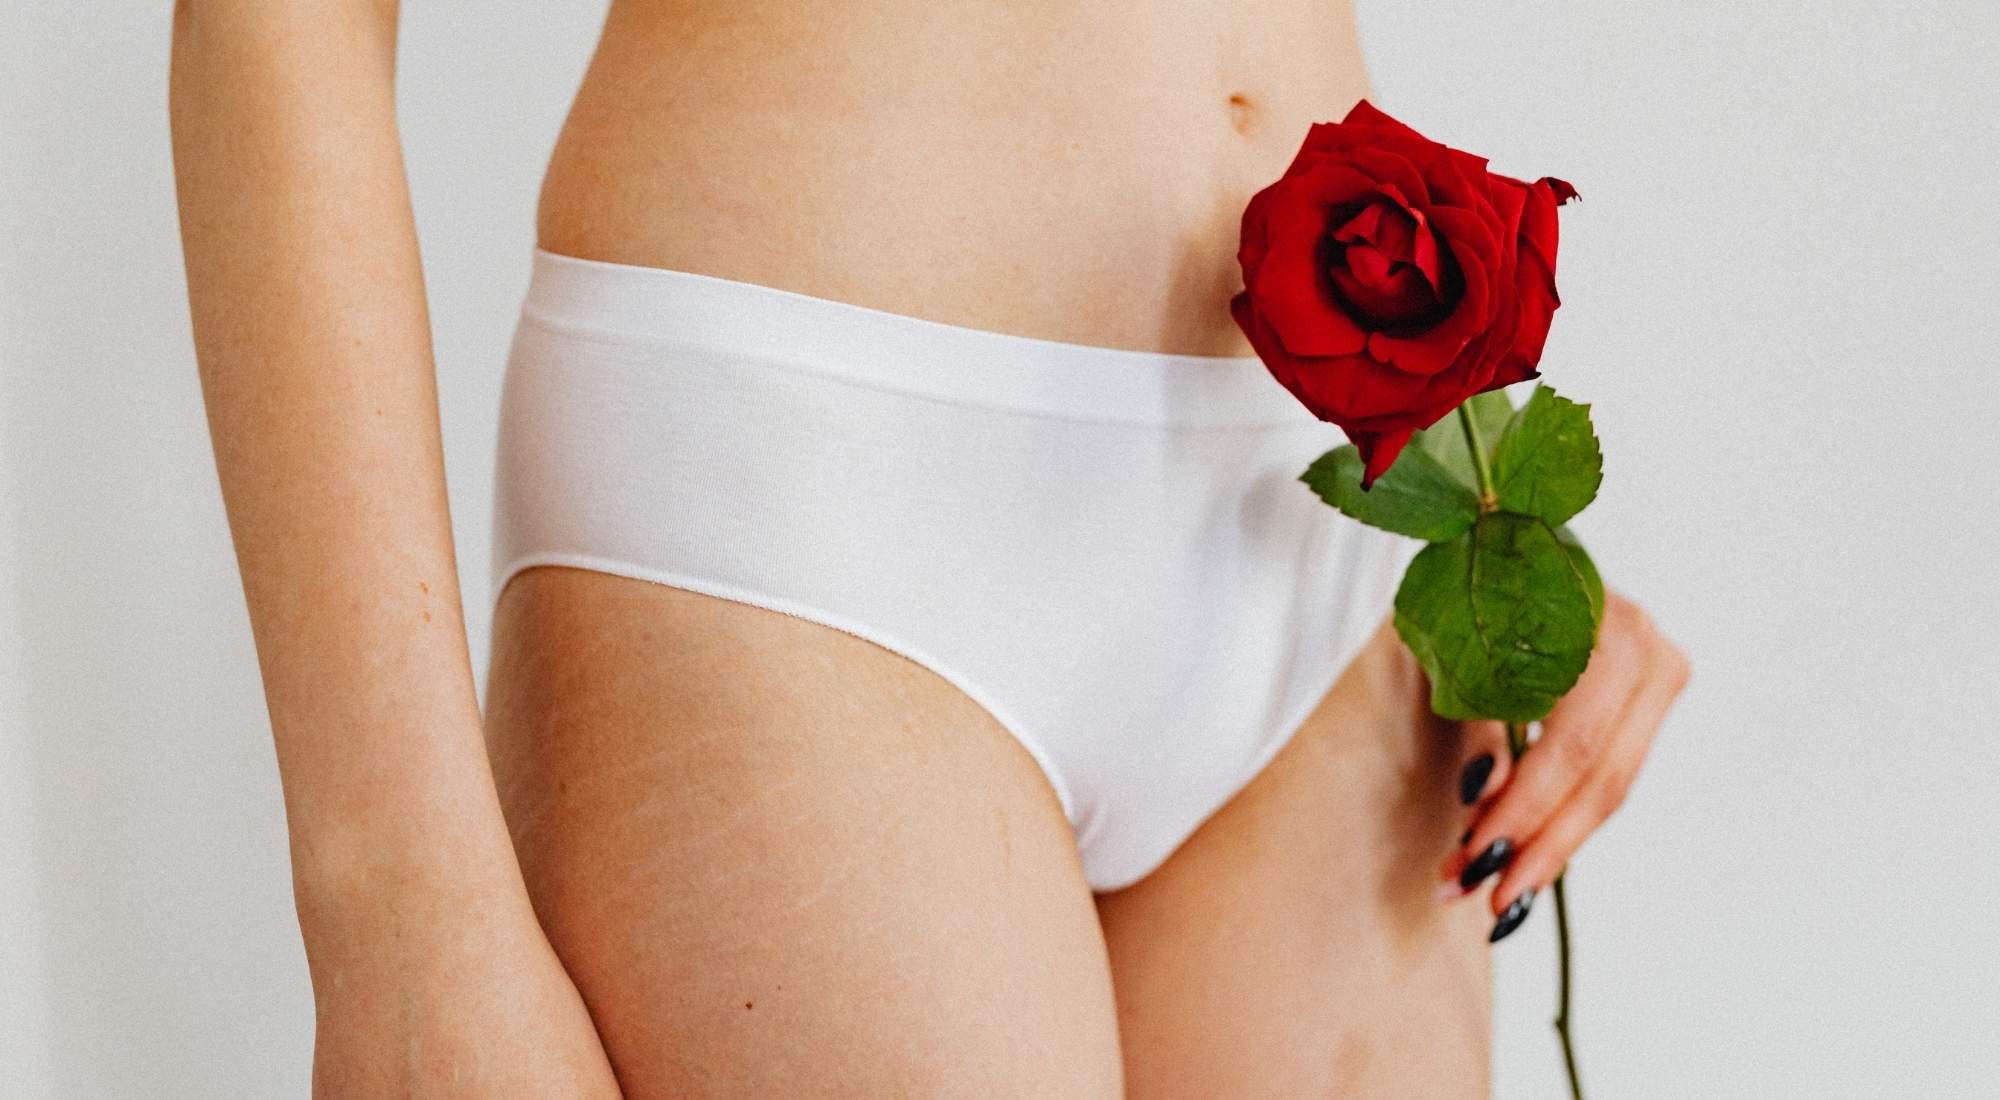 How Do You Wash Period Underwear? Pro Tips for Keeping Your Period Undies as Good as New